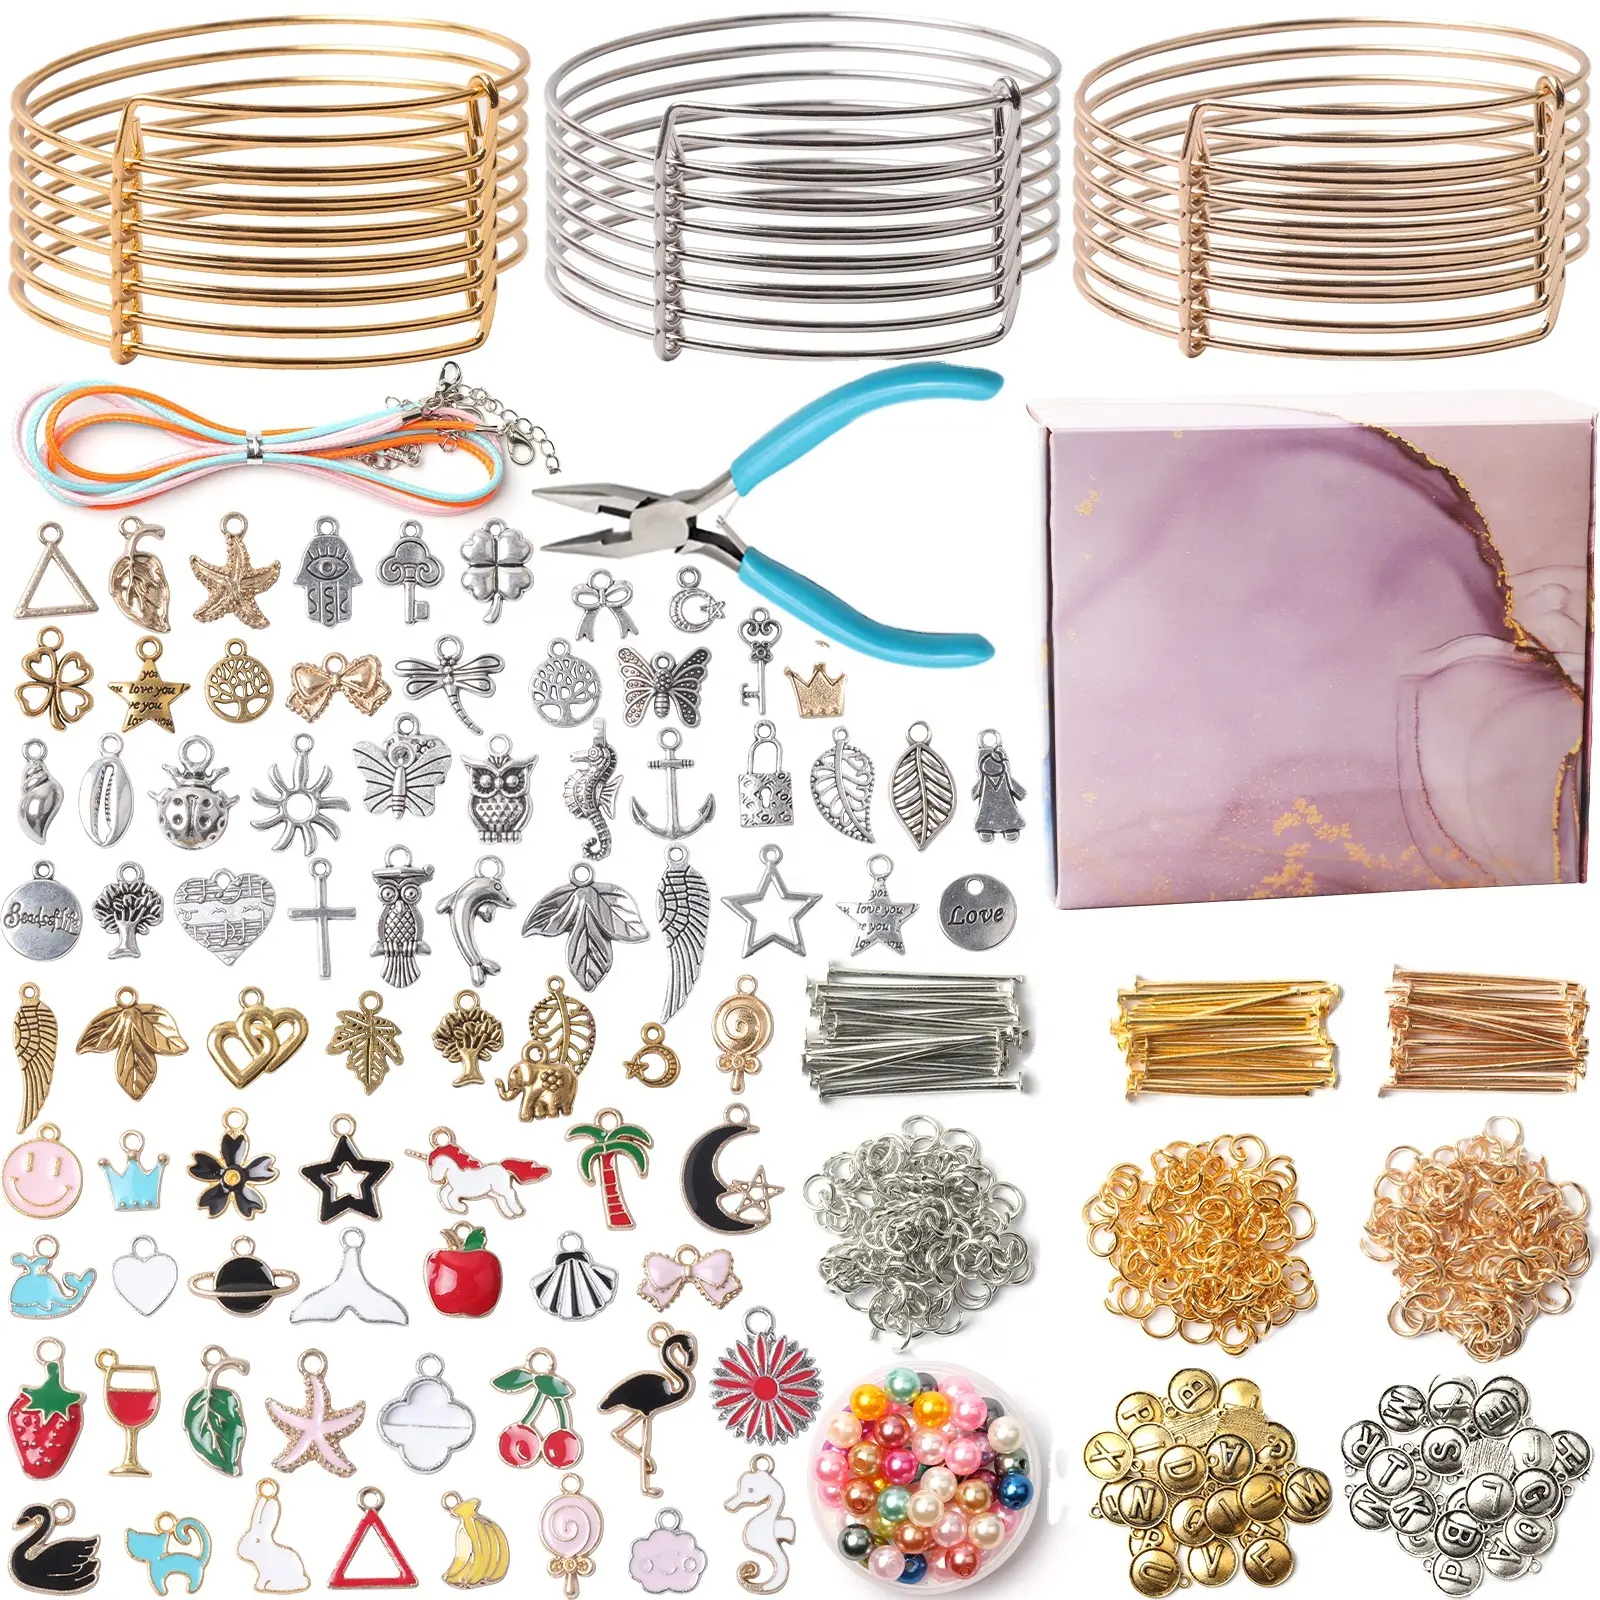 new Bangle Bracelets Making Kit with Expandable Bangles Silver Gold Gold Filled Bracelet Making Kit diy jewelry making findings